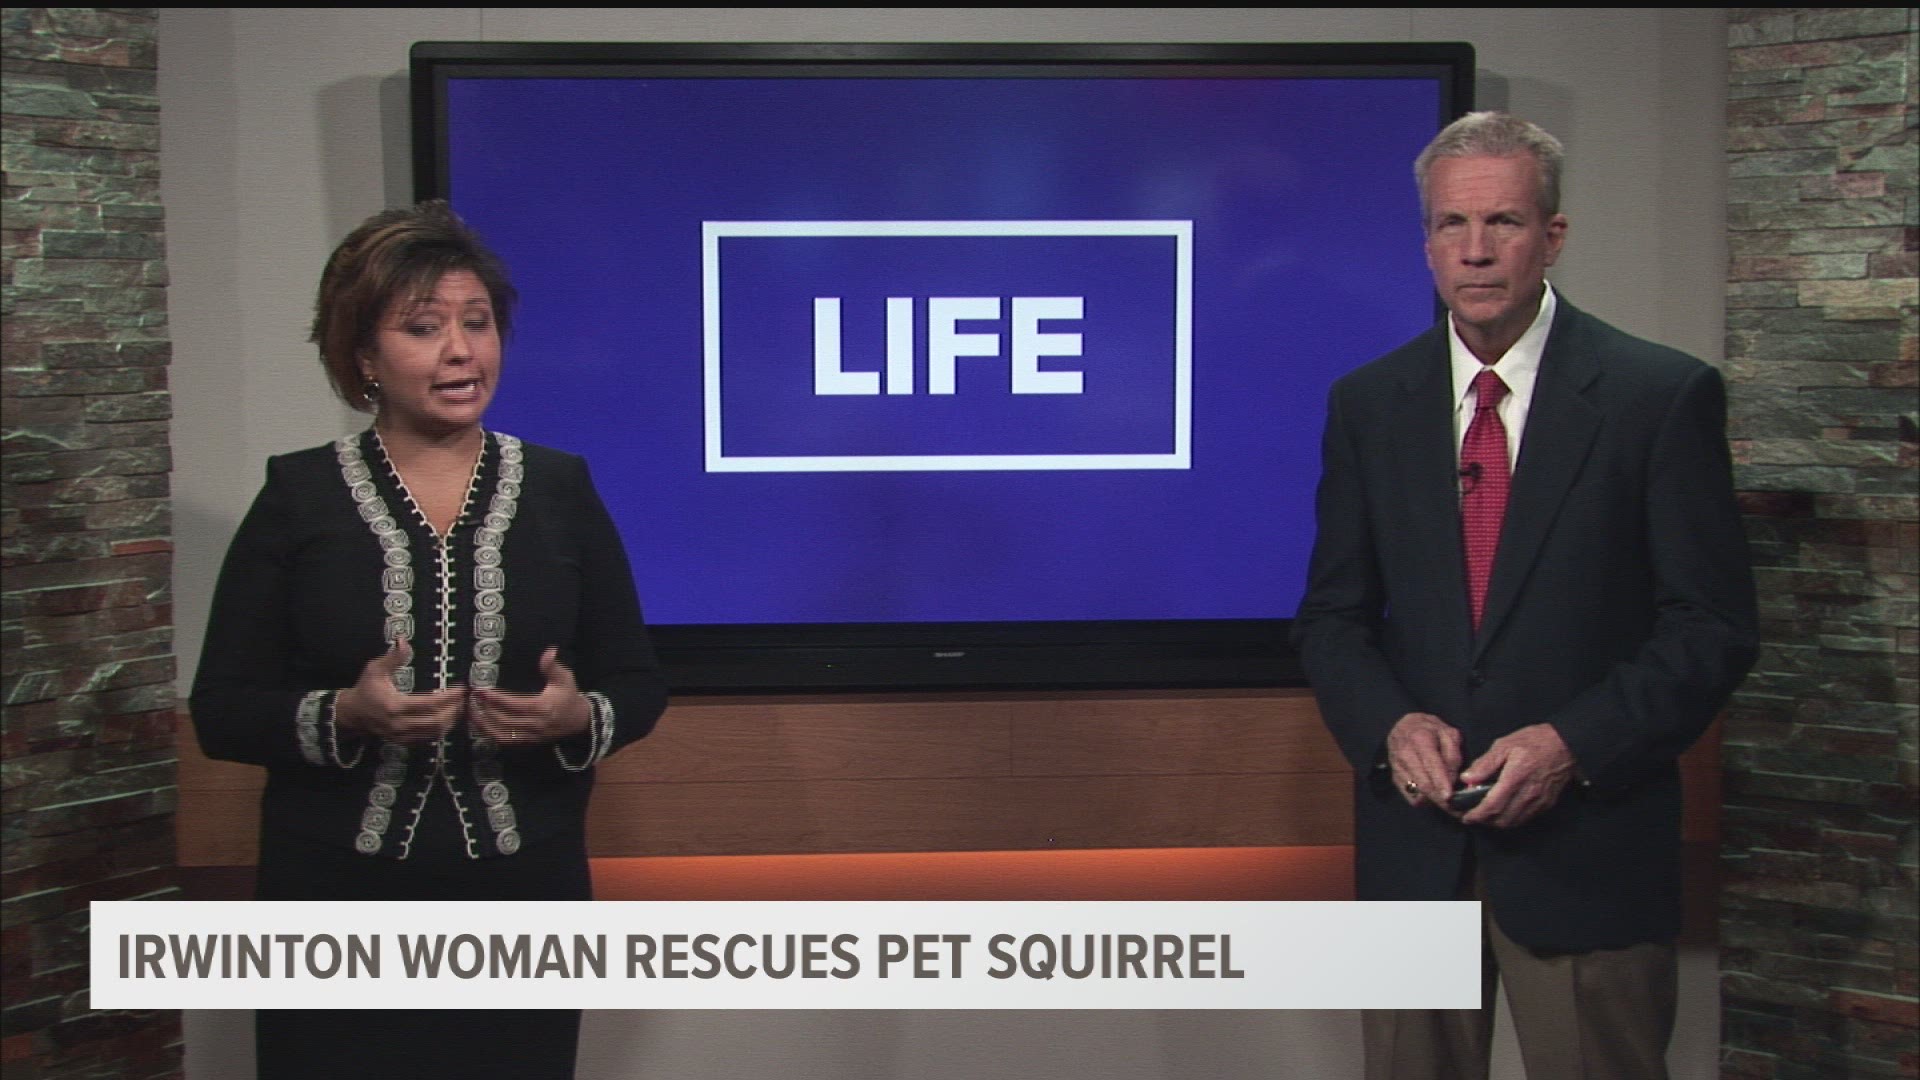 Irwinton woman rescues ailing squirrel